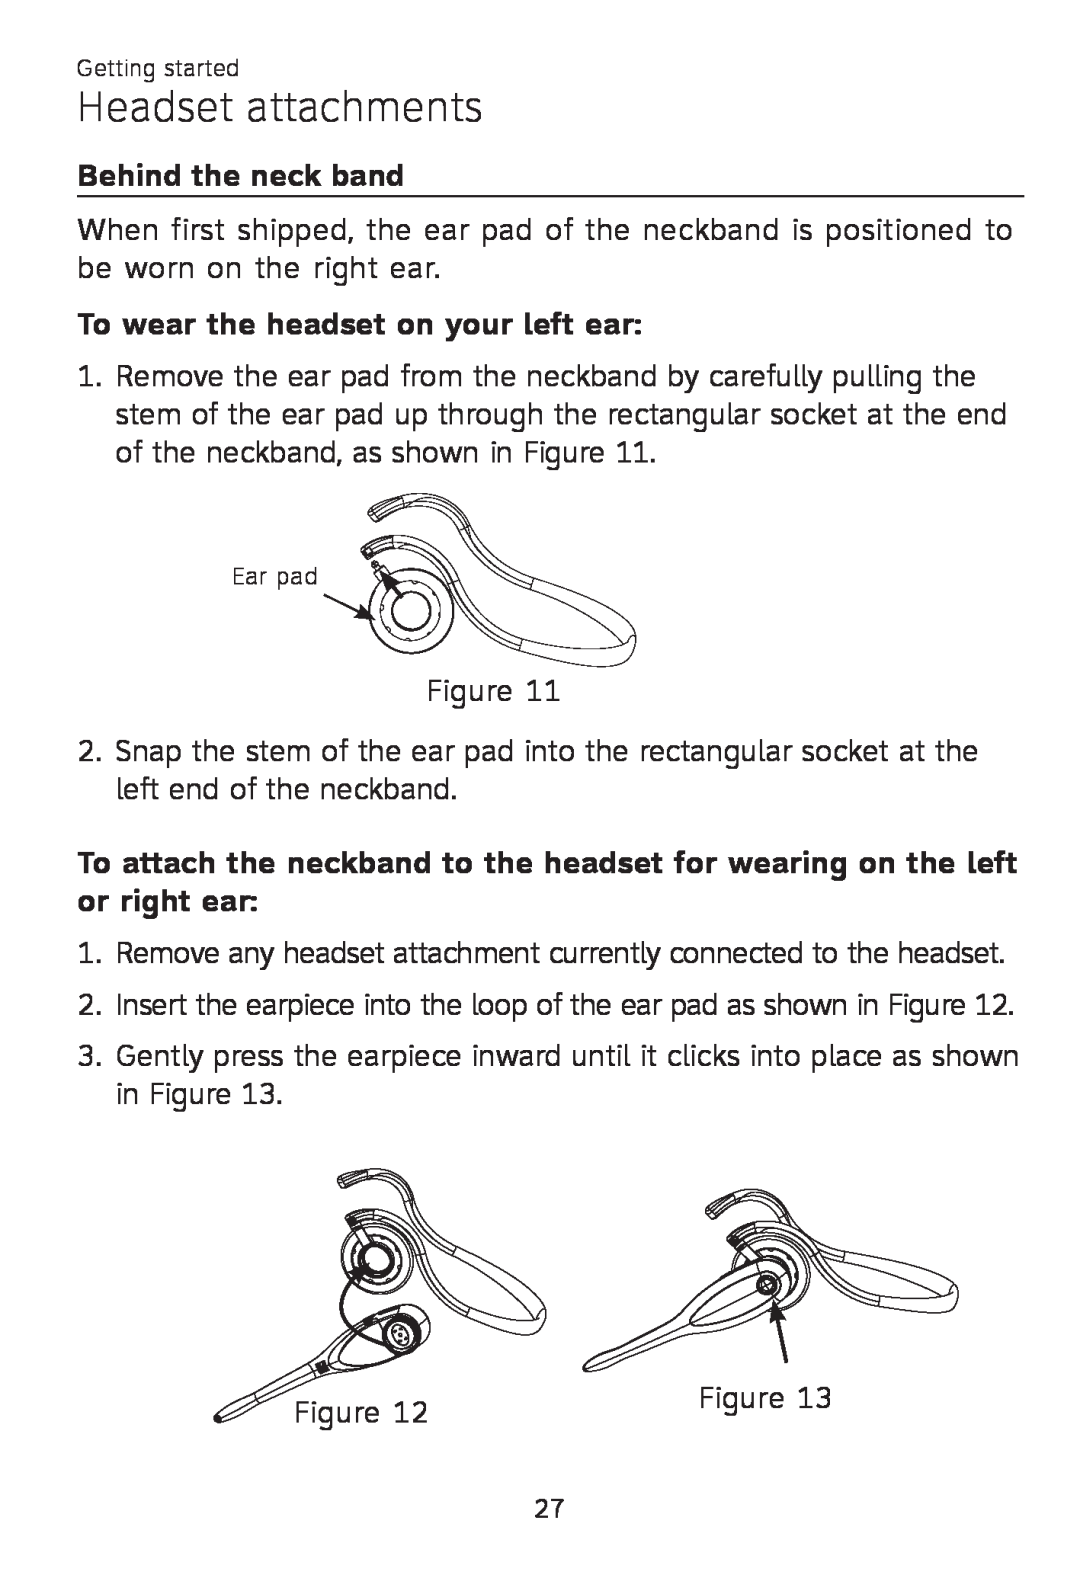 AT&T TL 7610 user manual Behind the neck band, To wear the headset on your left ear, Headset attachments 